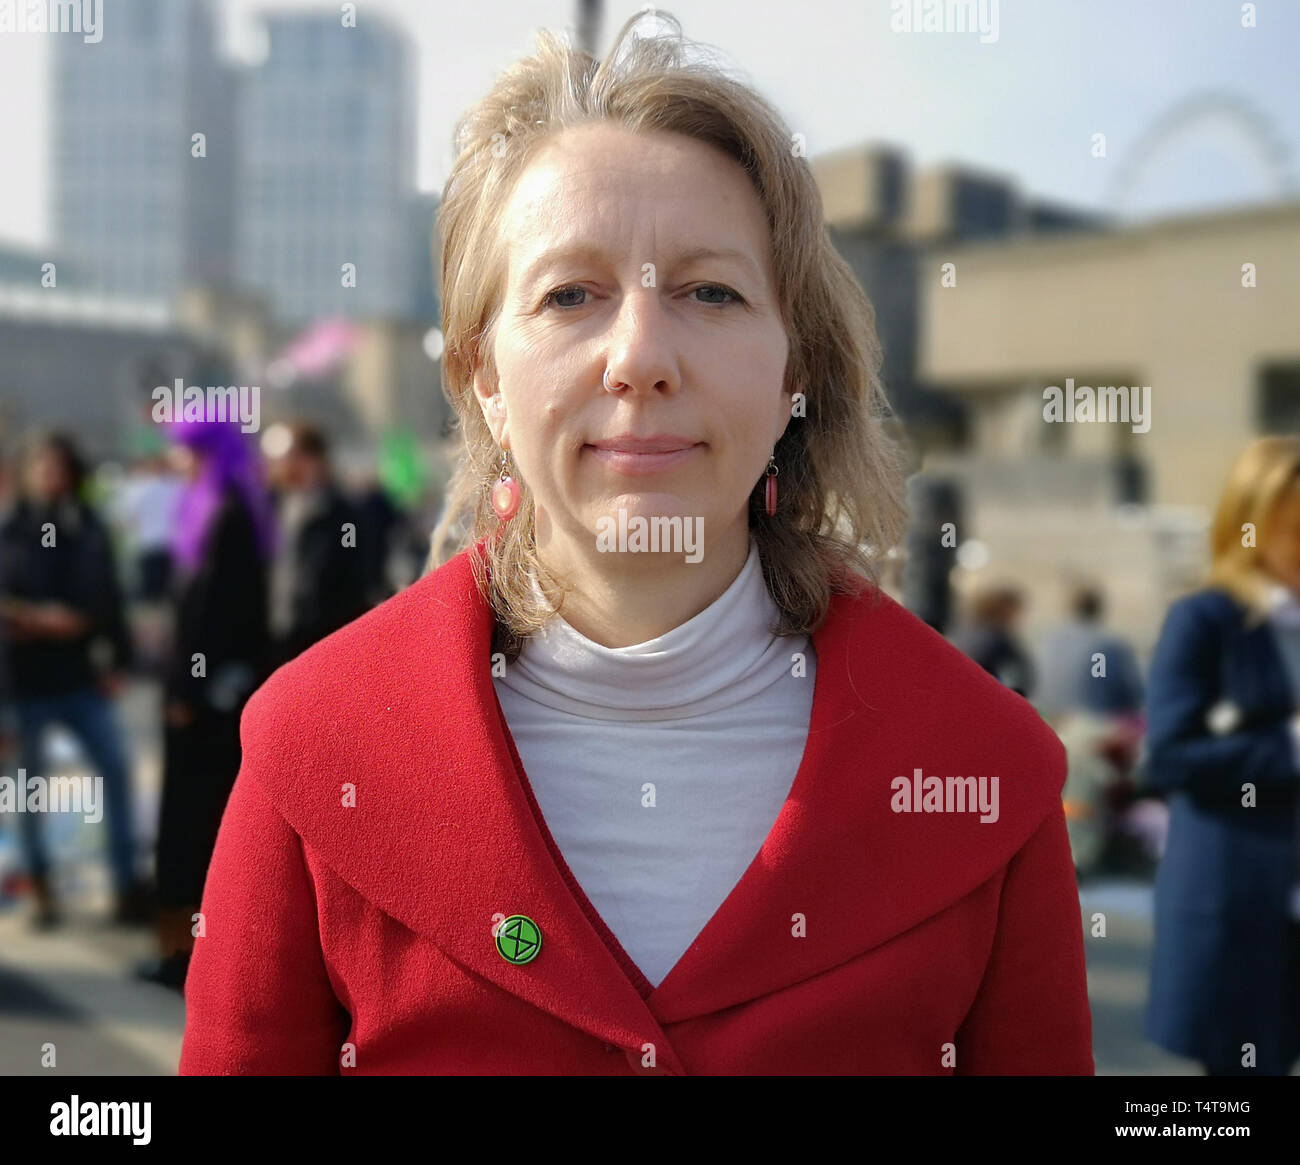 Co-founder of Extinction Rebellion Dr Gail Bradbrook on Waterloo Bridge, in London who has said protests will escalate if its demands are not met. It comes as Londoners face a fourth day of disruption in the capital, despite nearly 400 arrests. Stock Photo